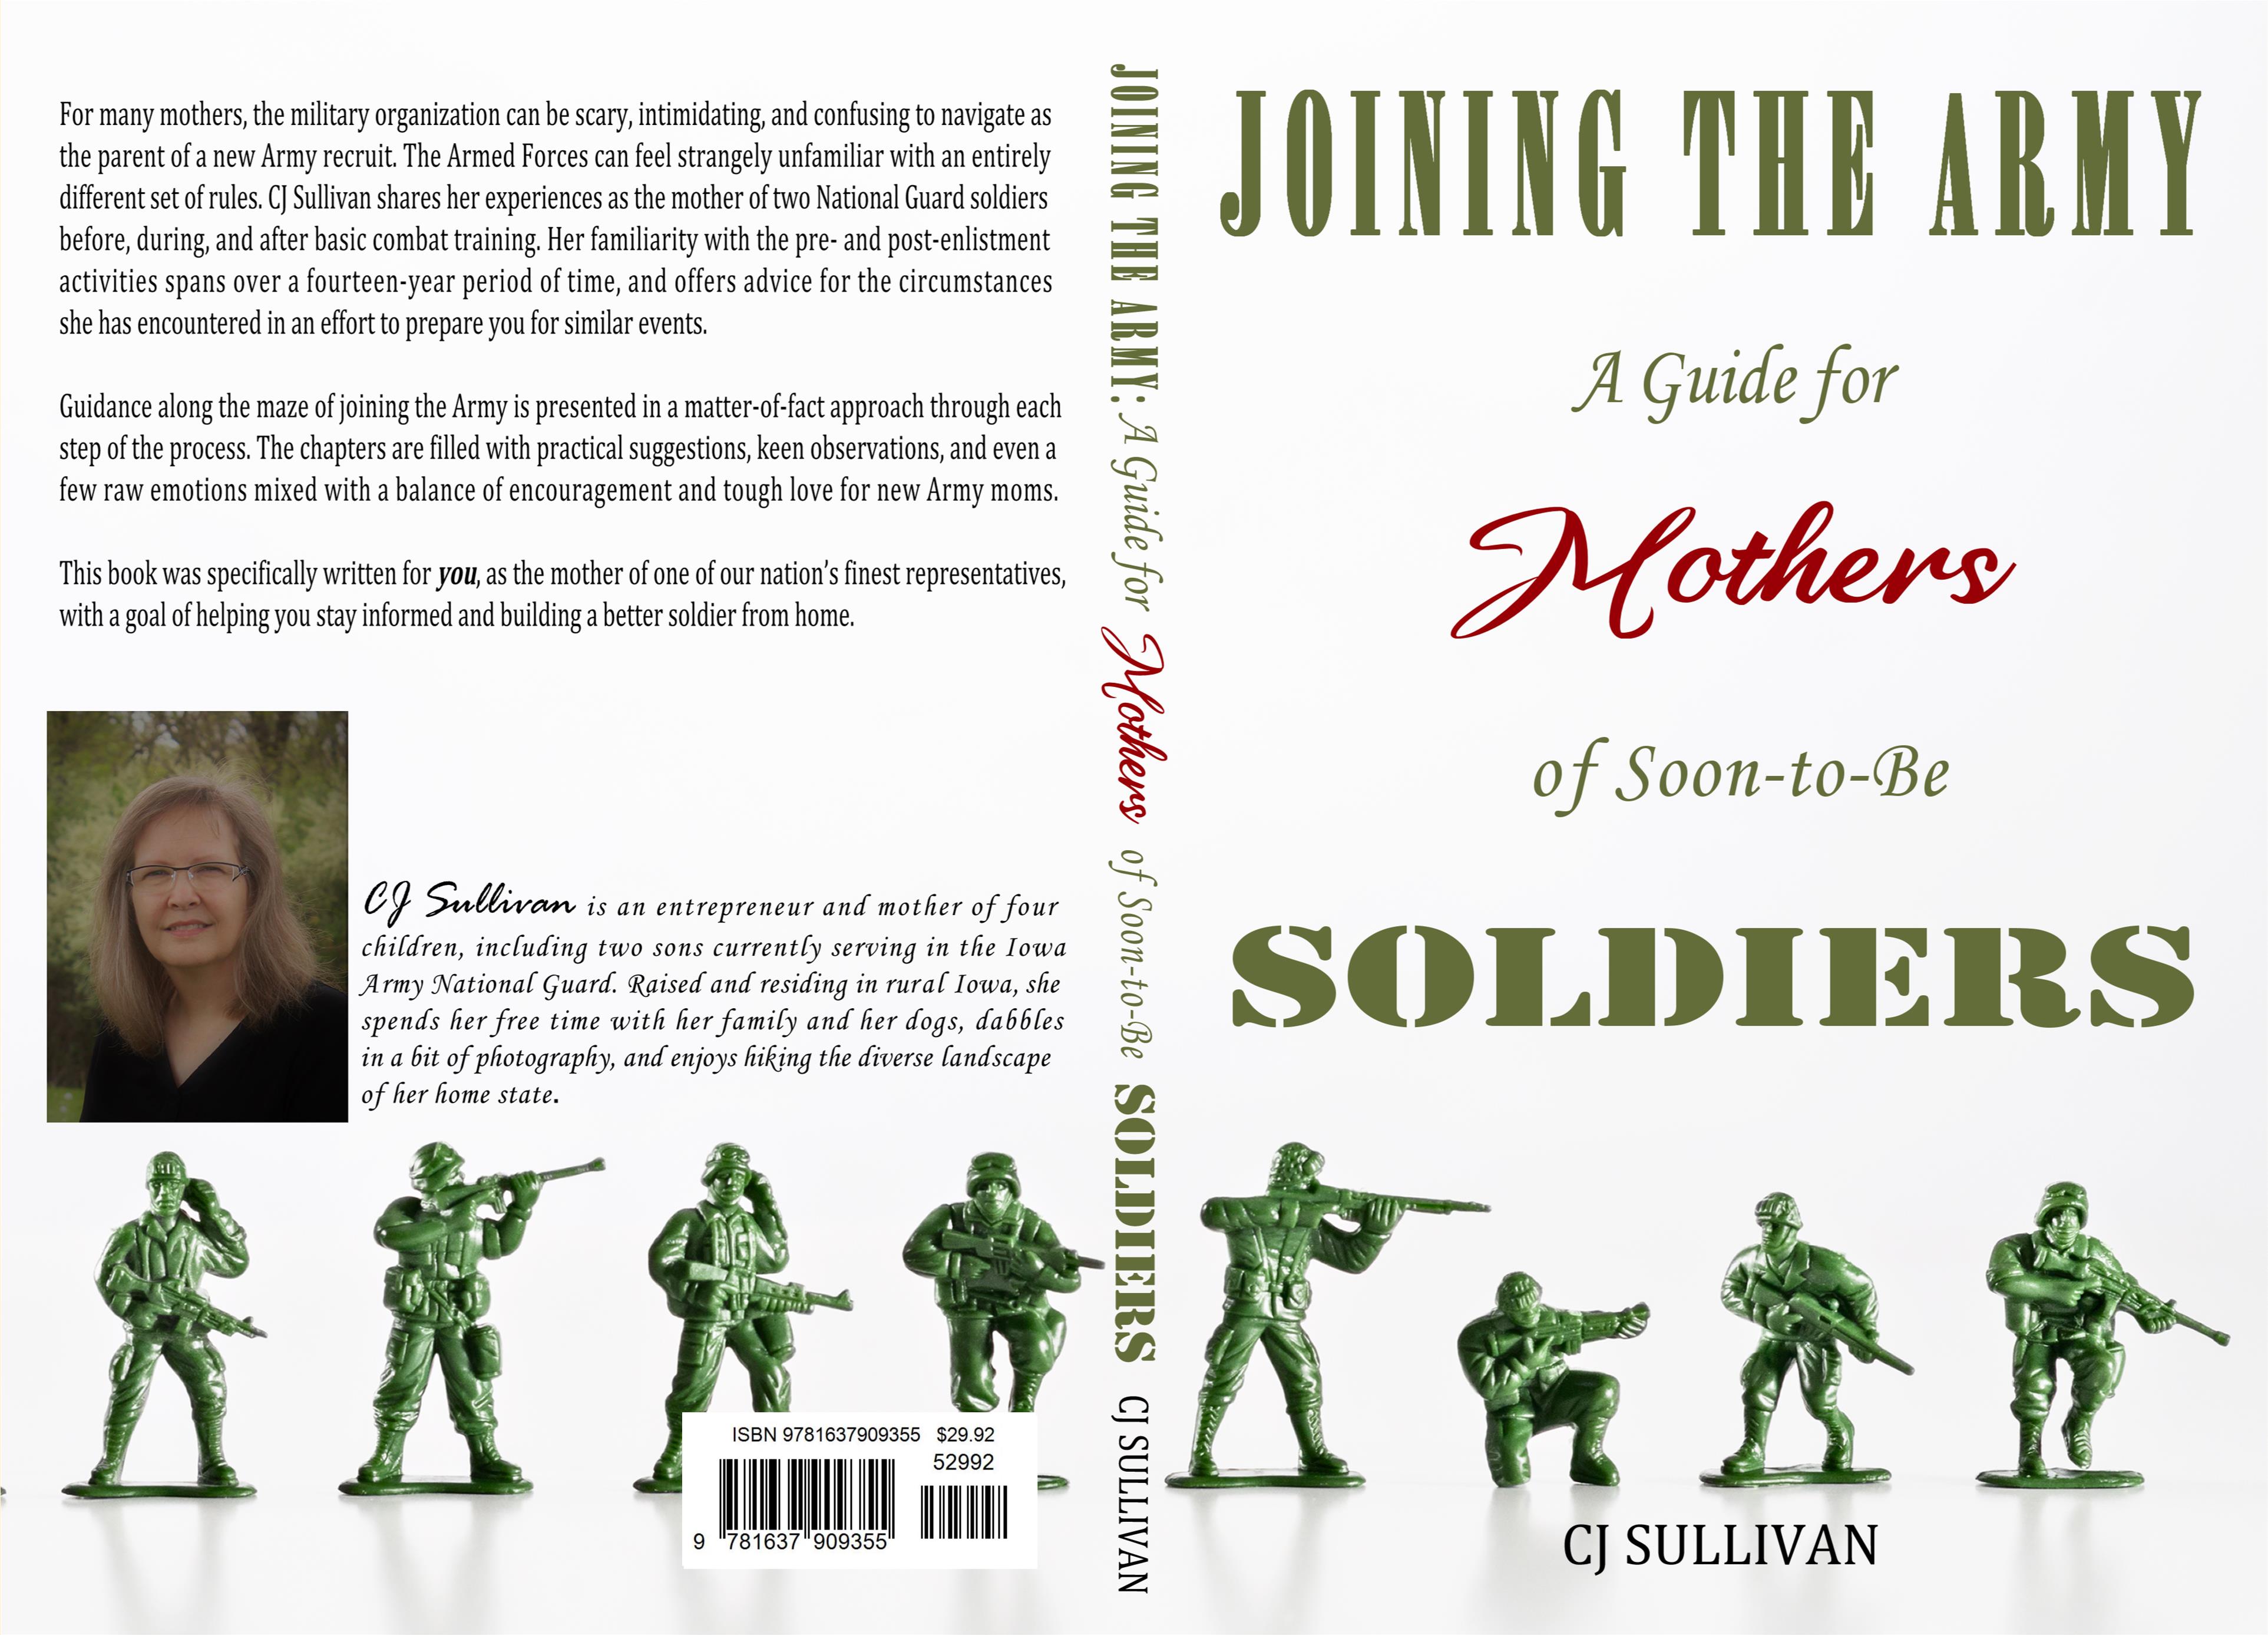 Joining the Army: A Guide for Mothers of Soon-to-Be Soldiers cover image